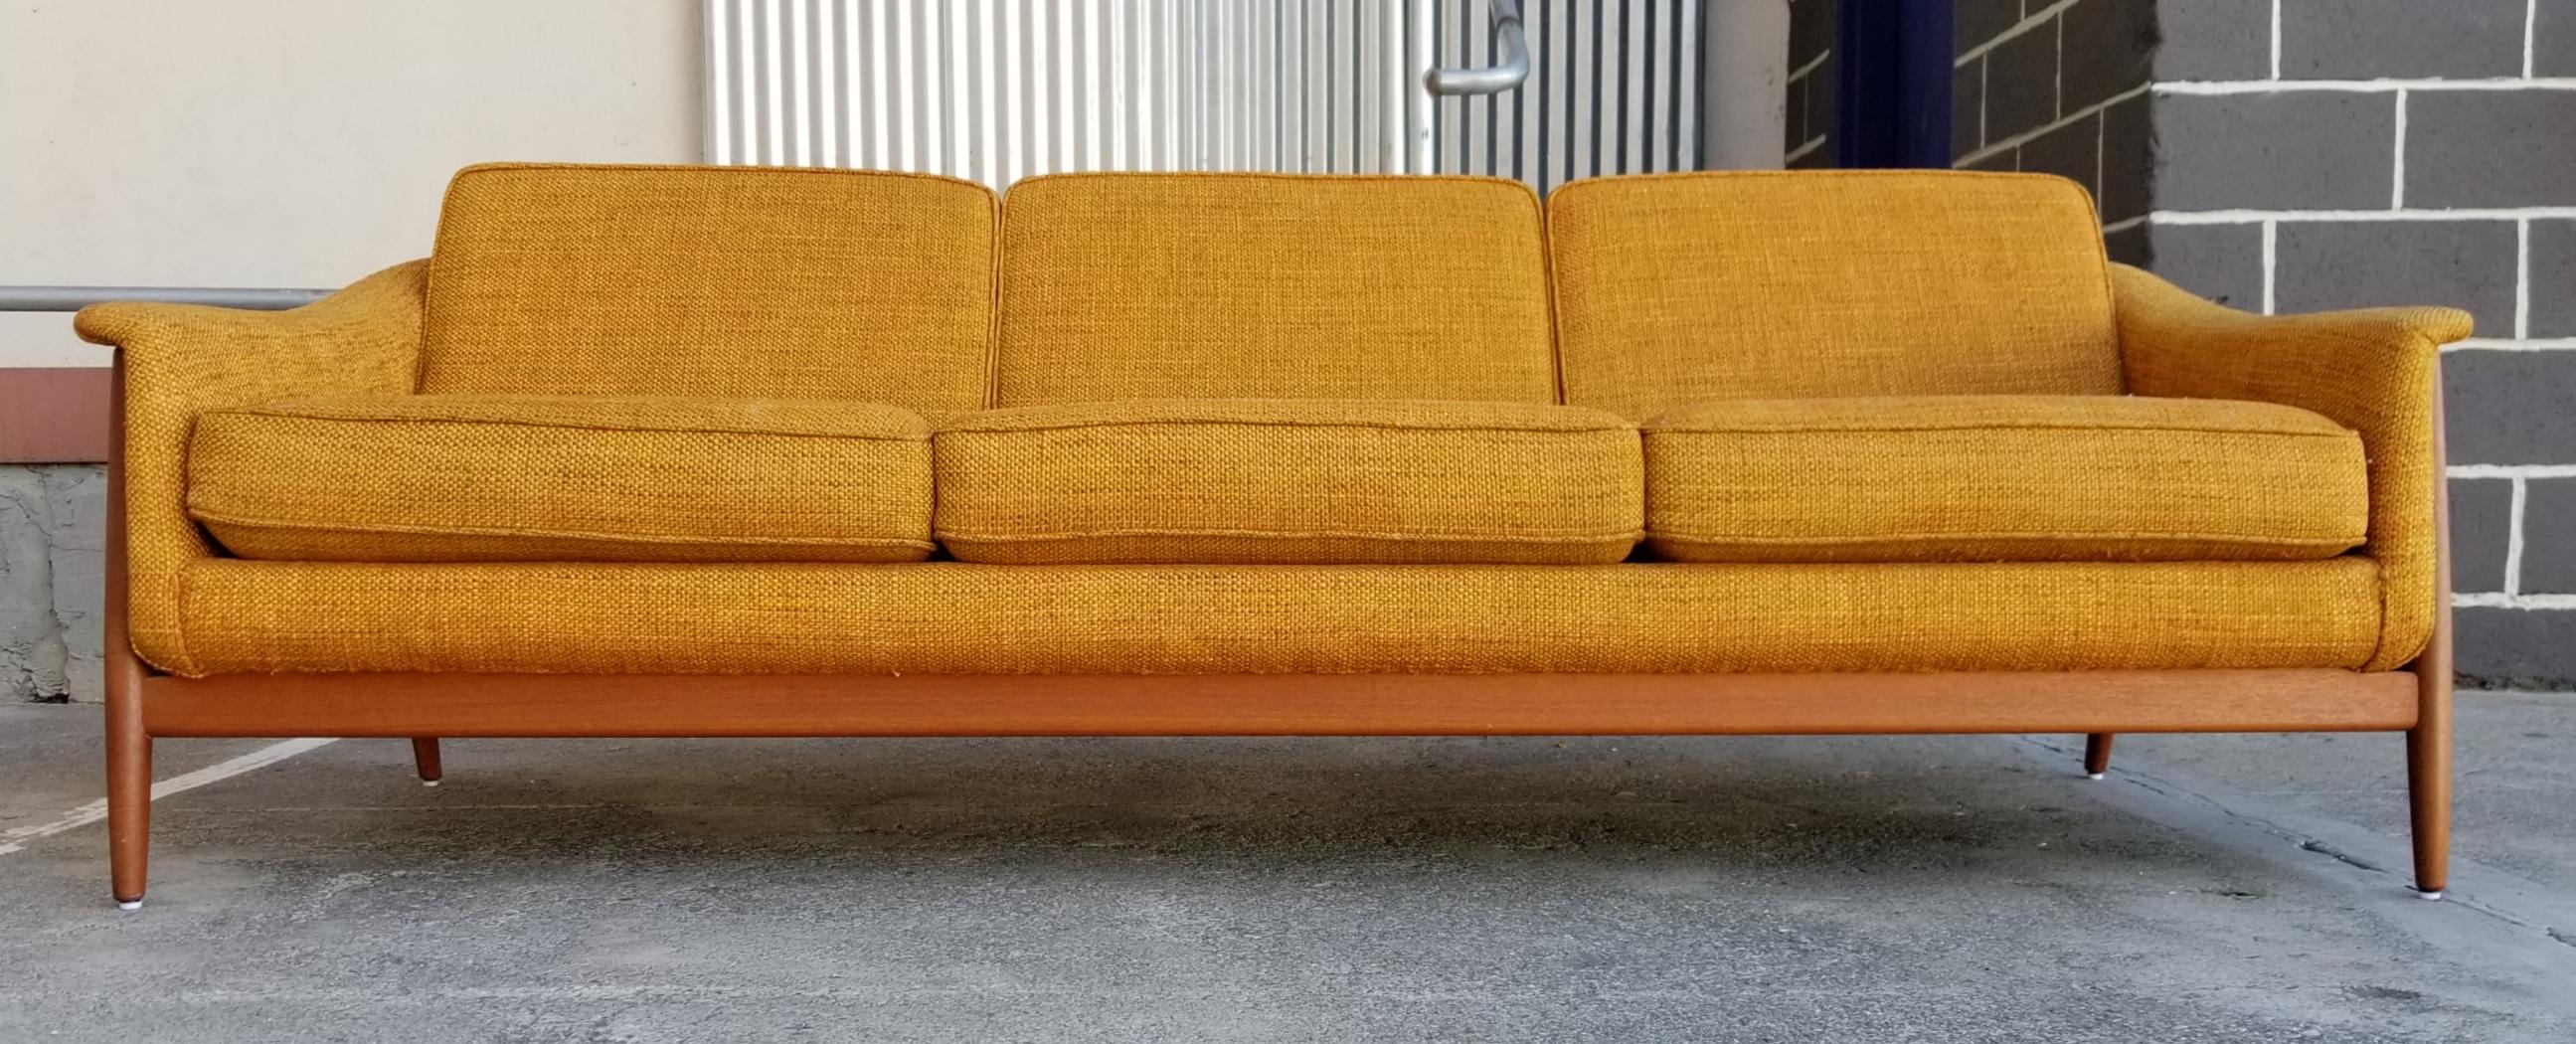 A very nice, original example of a 1960s teak Danish modern 3-seat sofa designed by Folke Ohlsson for DUX. Amazing original condition with original fabric. All 6 reversible cushions have new foam stuffing. Original finish to teak exoskeleton frame